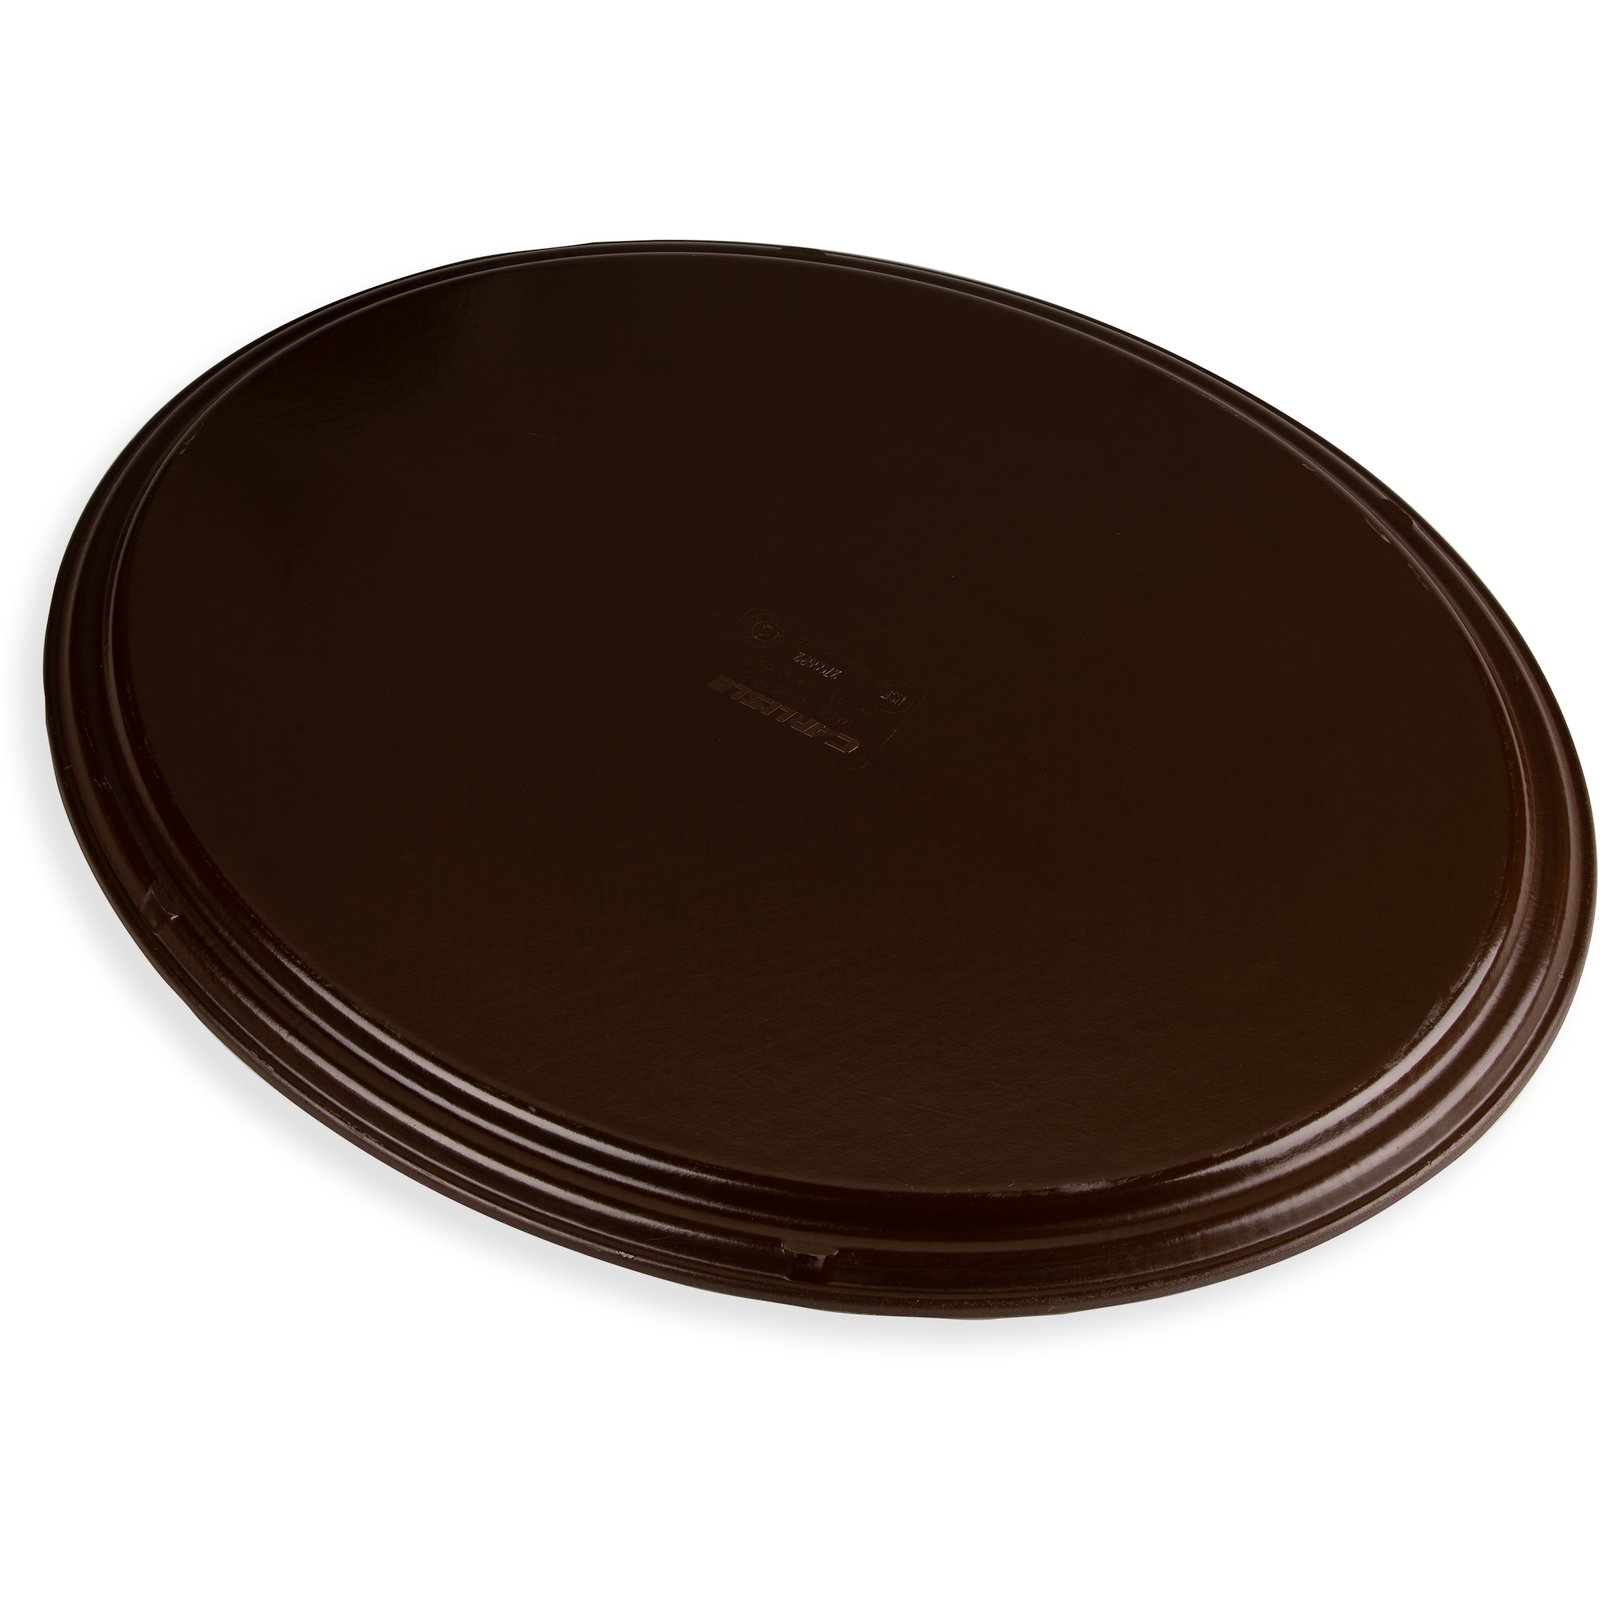 Tray, 27x22 oval serving tray